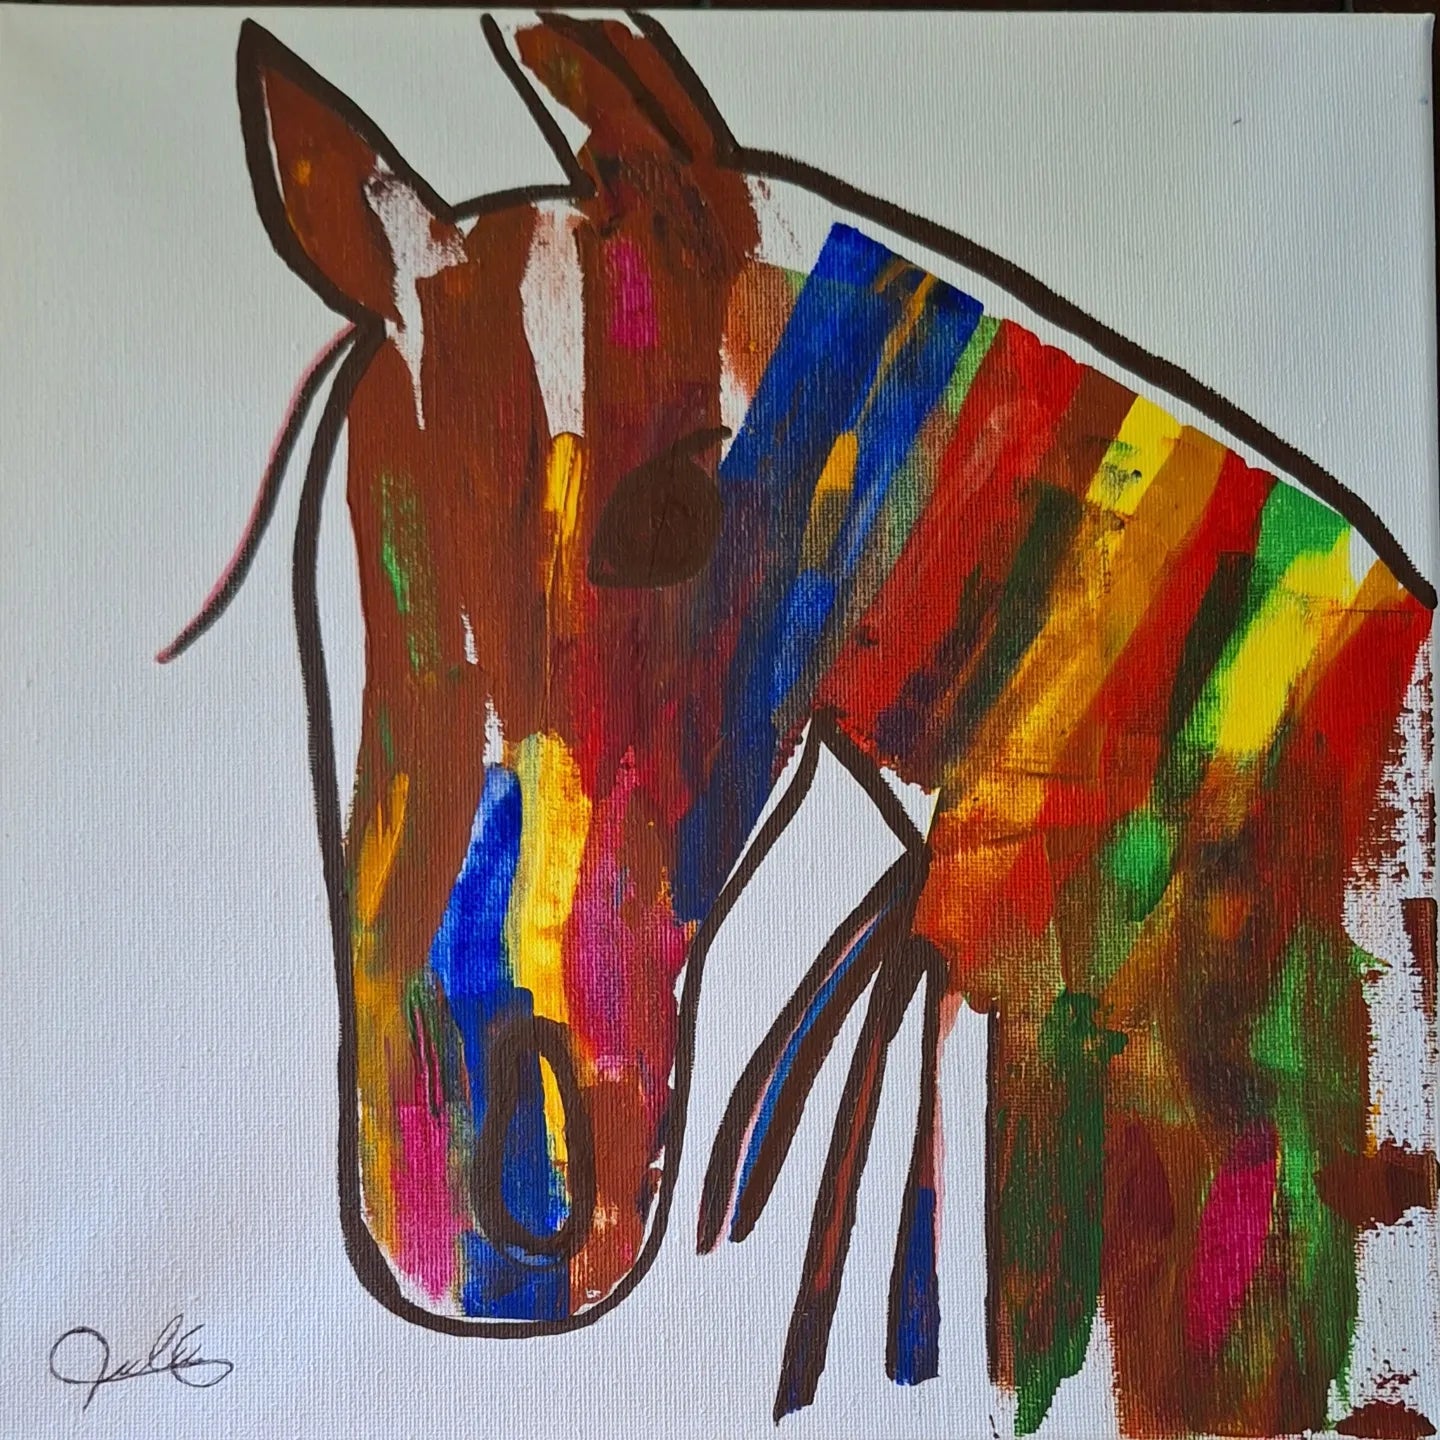 'THE HORSE' - Watercolor on Canvas